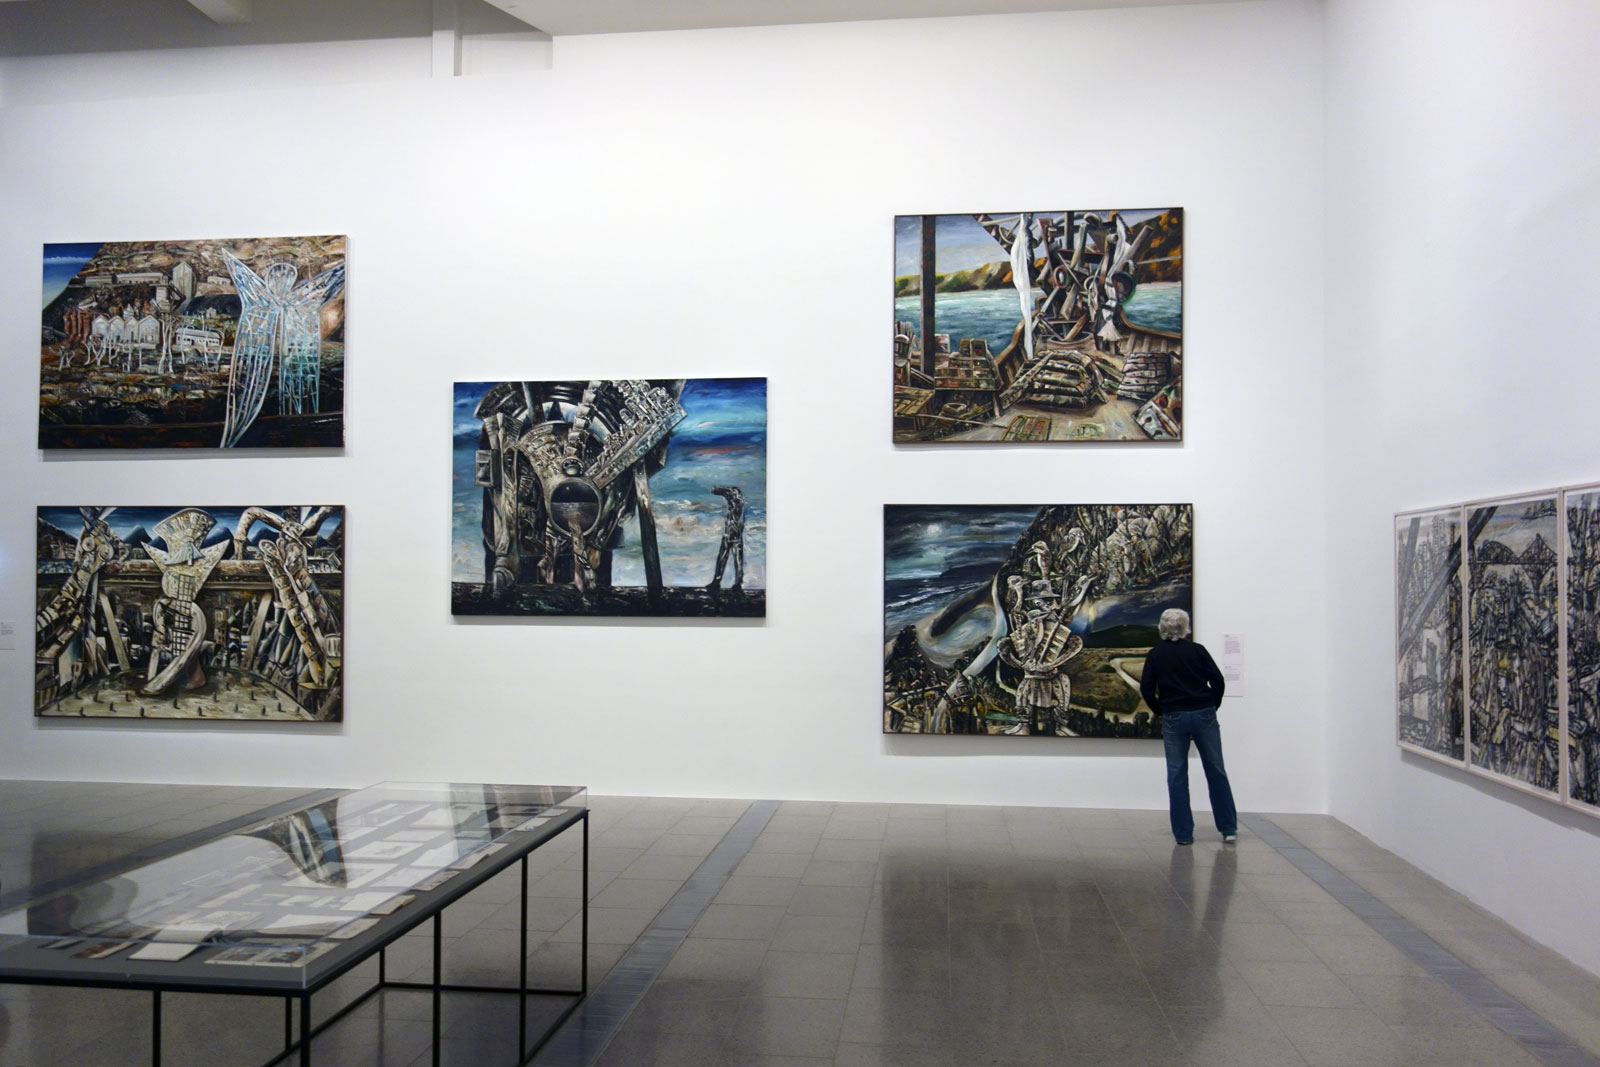 Installation view of the exhibition 'Jan Senbergs: Observation – Imagination' at The Ian Potter Centre: NGV Australia showing 'Blue angel of Wittenoom' at top left (1988, below); and 'Otway night' at bottom right (1994, below)